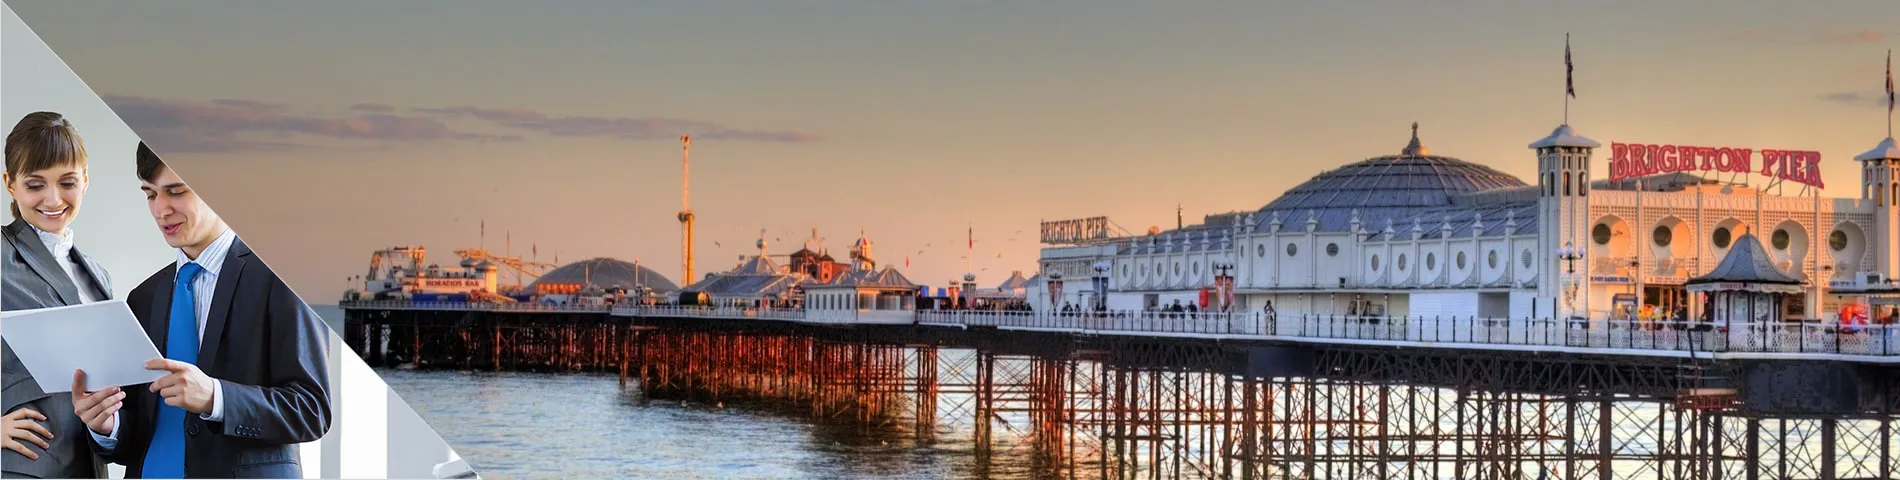 Brighton - Business One-to-One